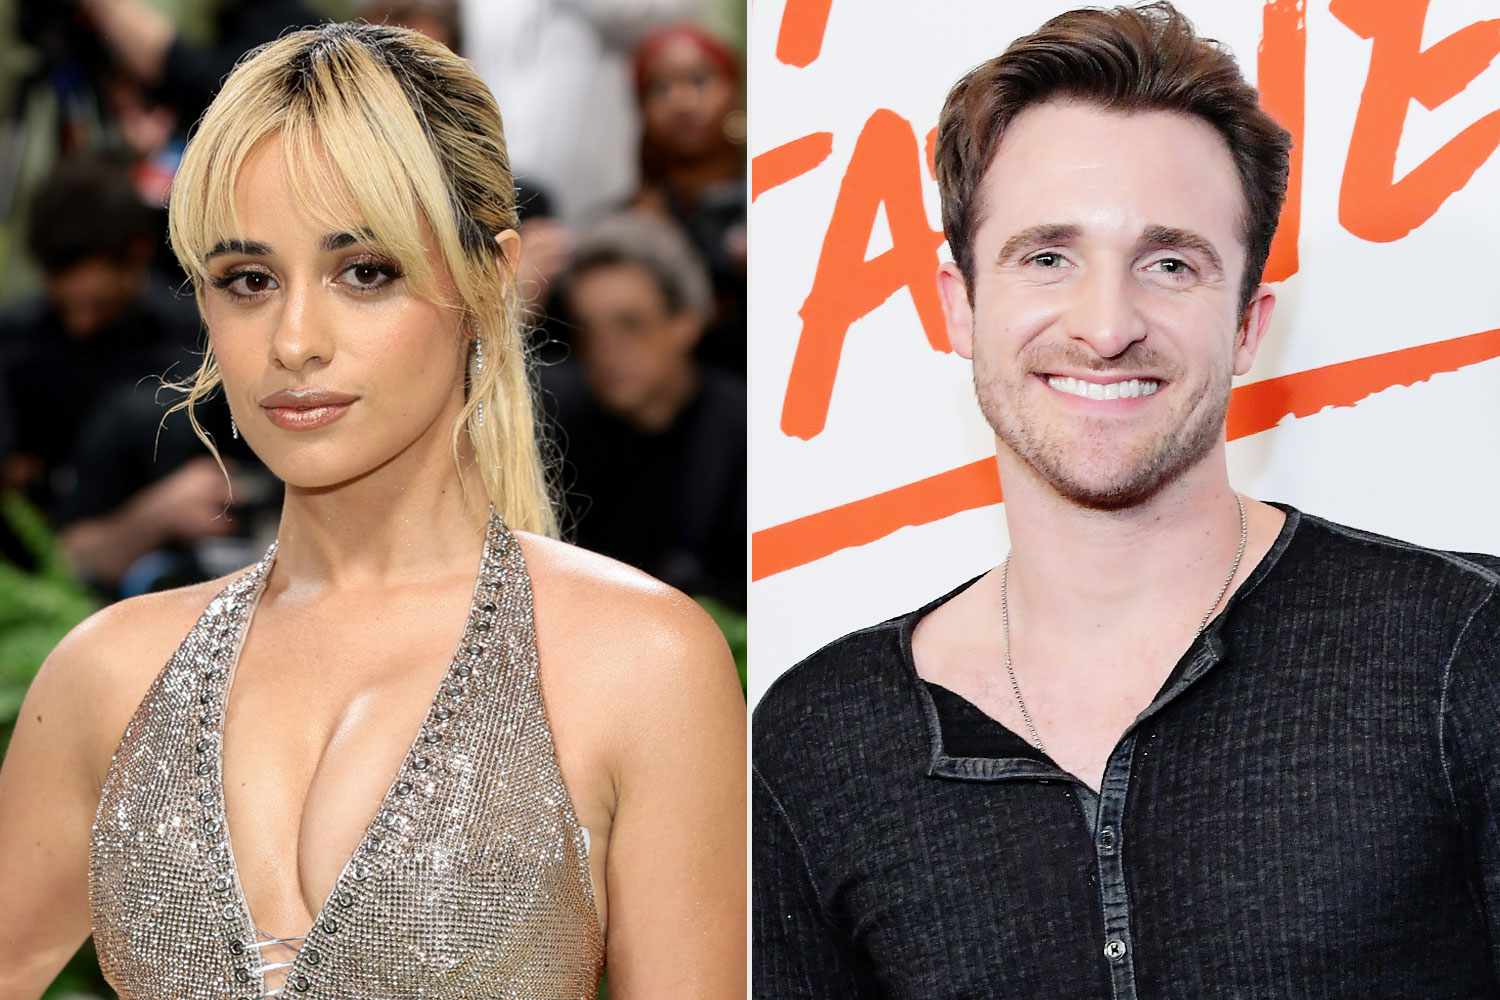 Camila Cabello Reveals She Lost Her Virginity to Ex Matthew Hussey at Age 20: 'It Was Beautiful'